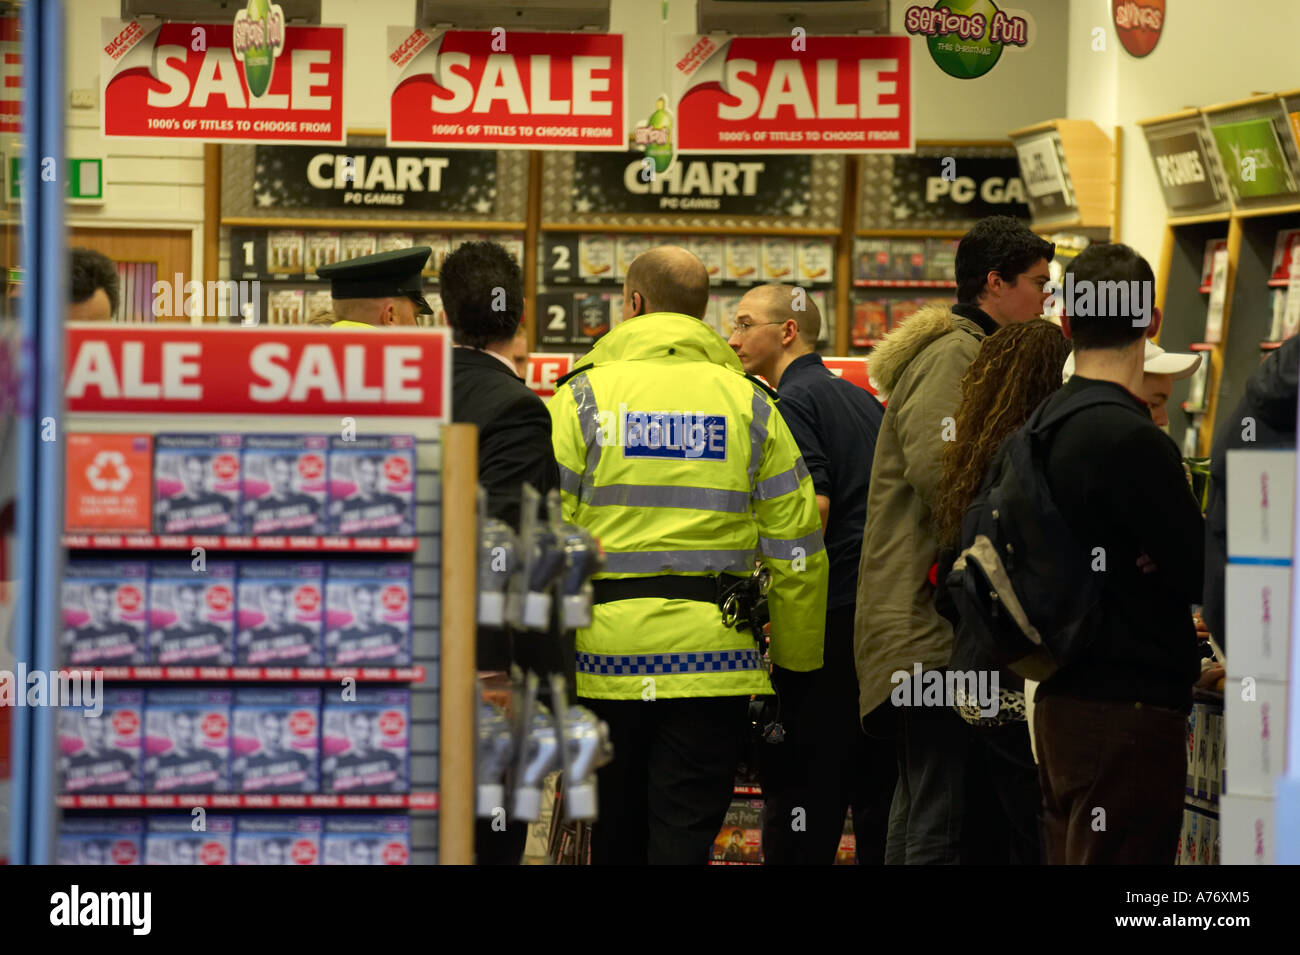 Psni Police Officer Enters Record Shop To Arrest Shoplifter During Christmas Shopping In Belfast